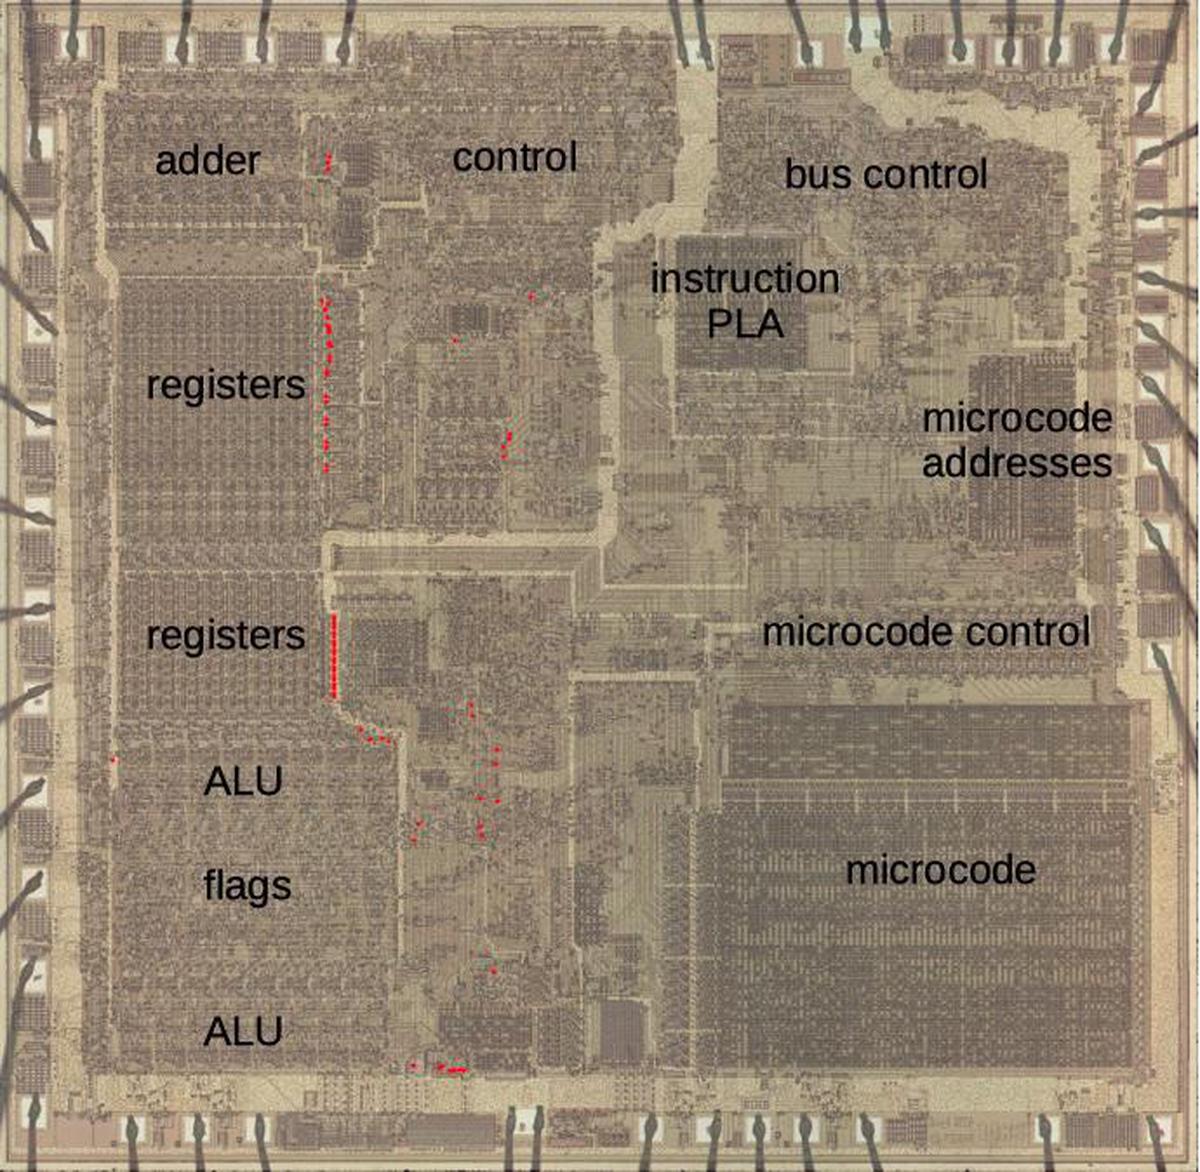 The 8086 die with main functional blocks labeled. The bootstrap drivers are indicated with red dots.